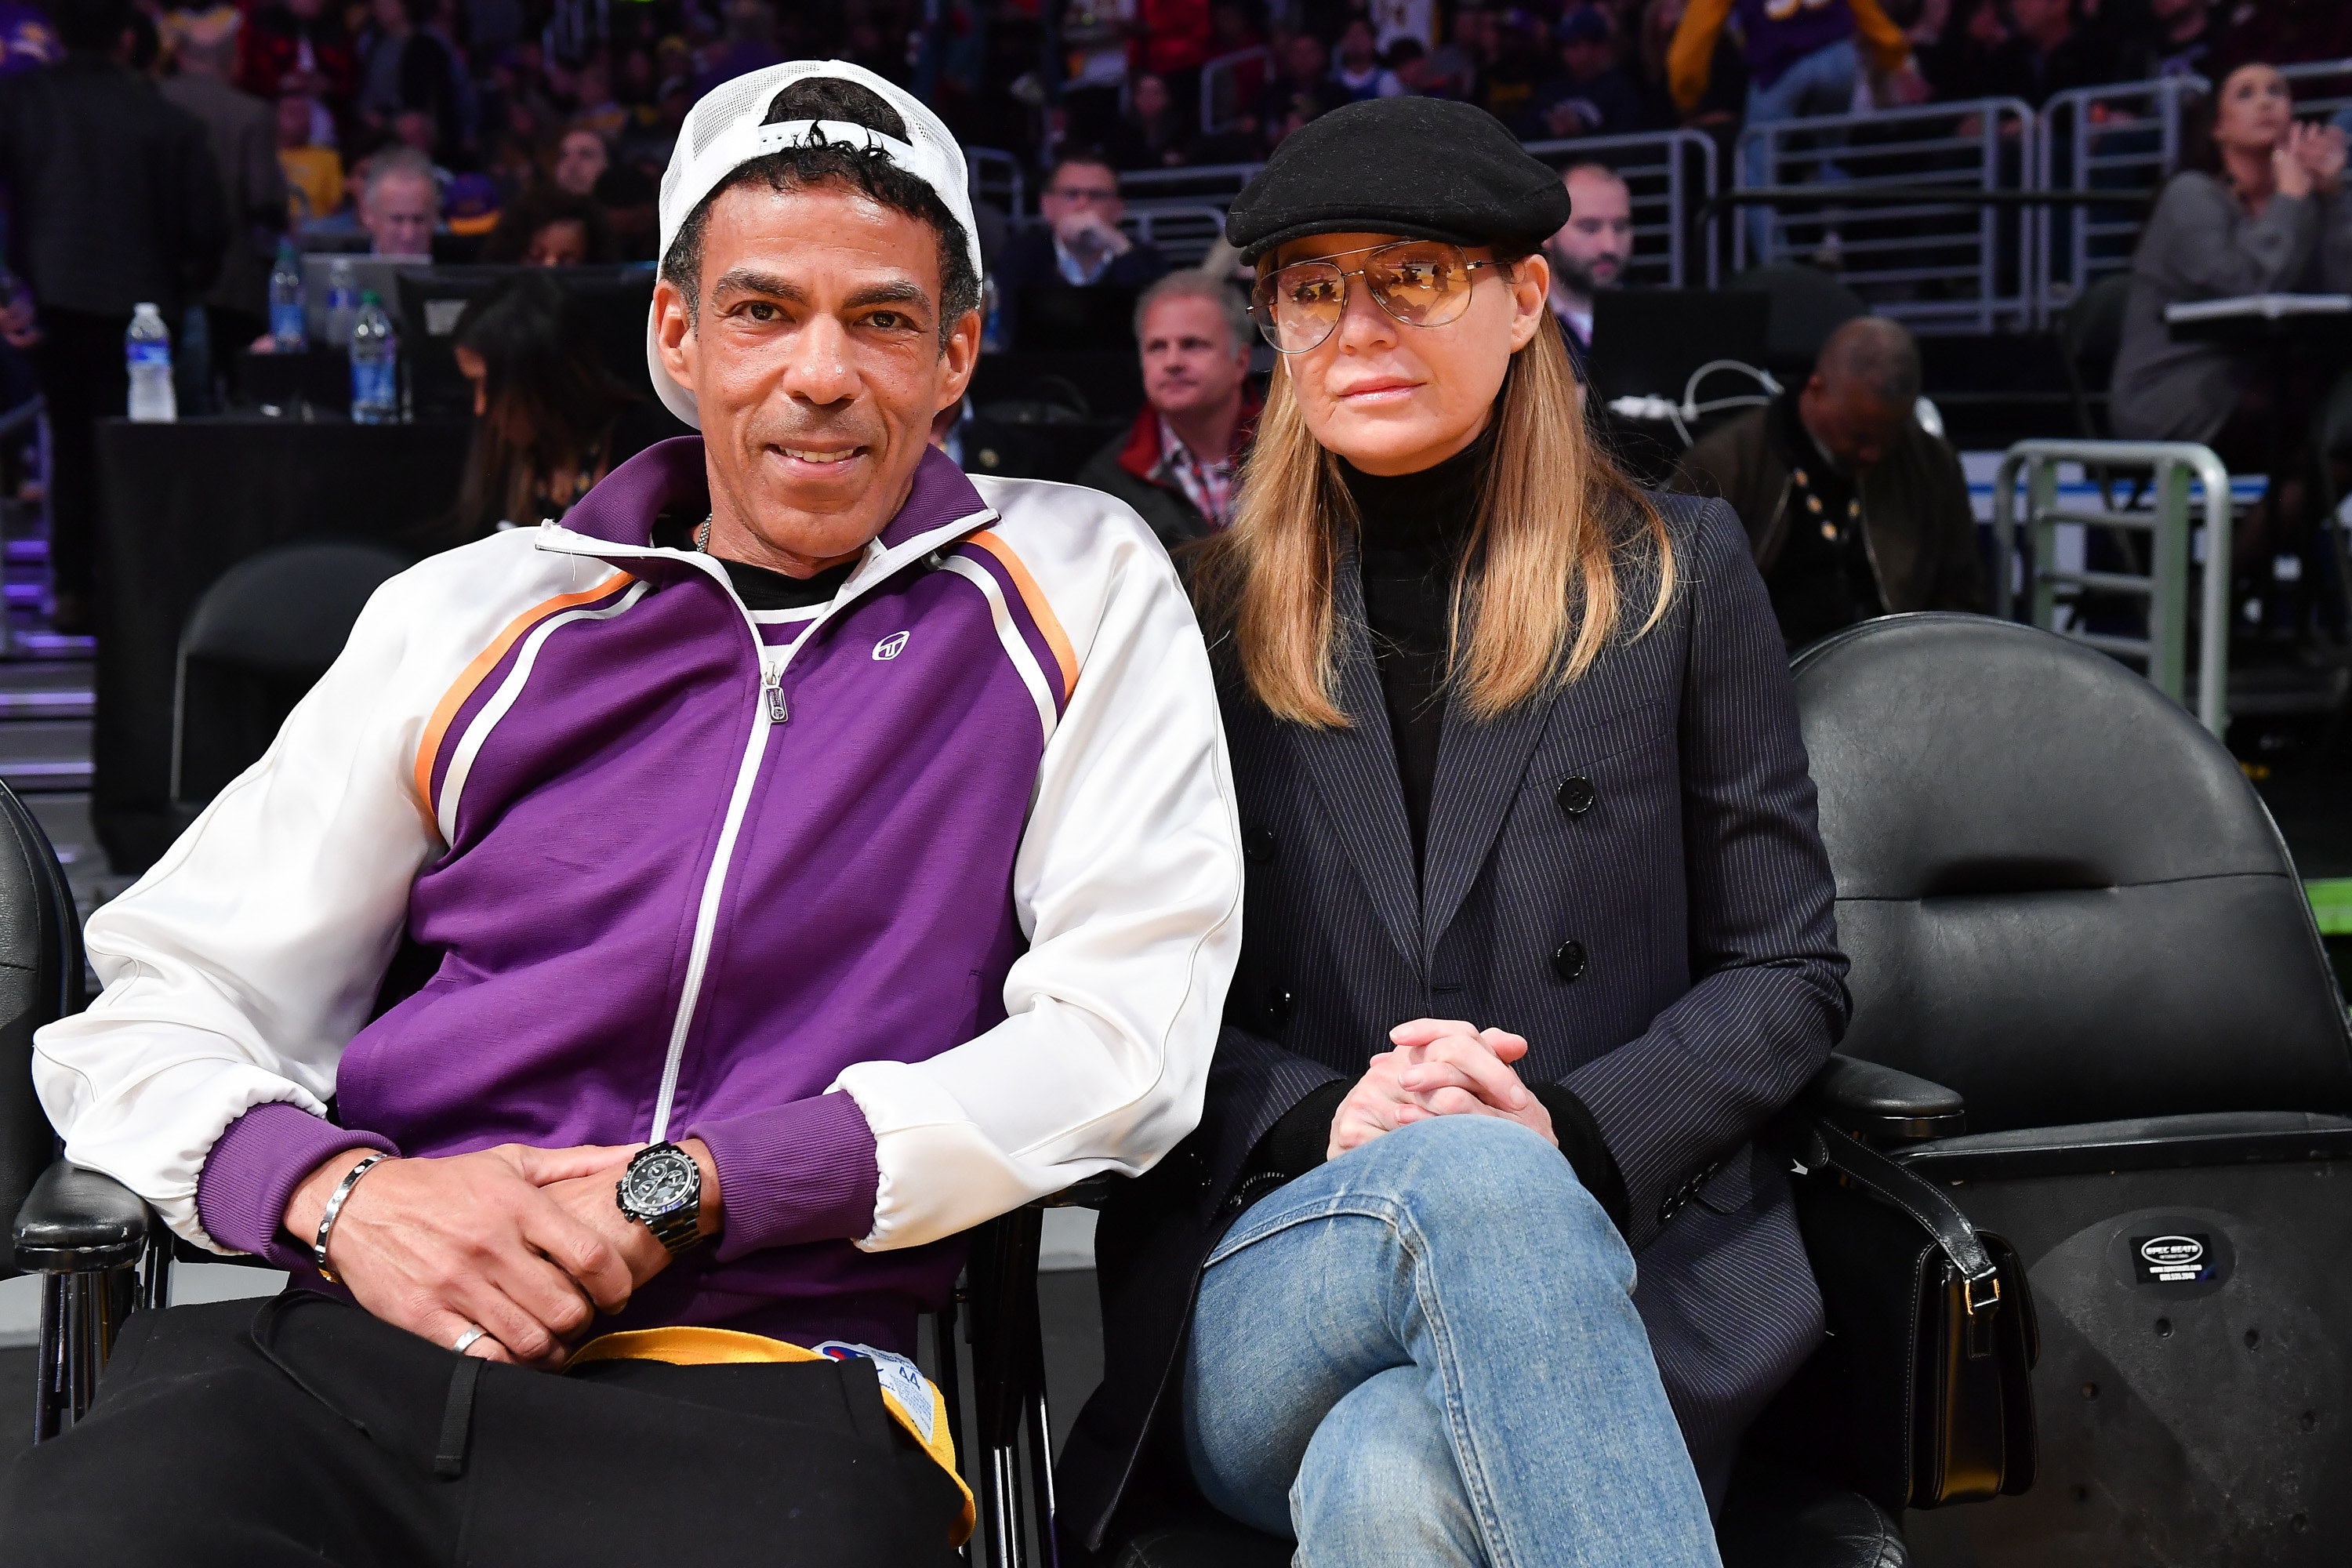 Chris Ivery and Ellen Pompeo attend a basketball game between the Los Angeles Lakers and the Houston Rockets at Staples Center